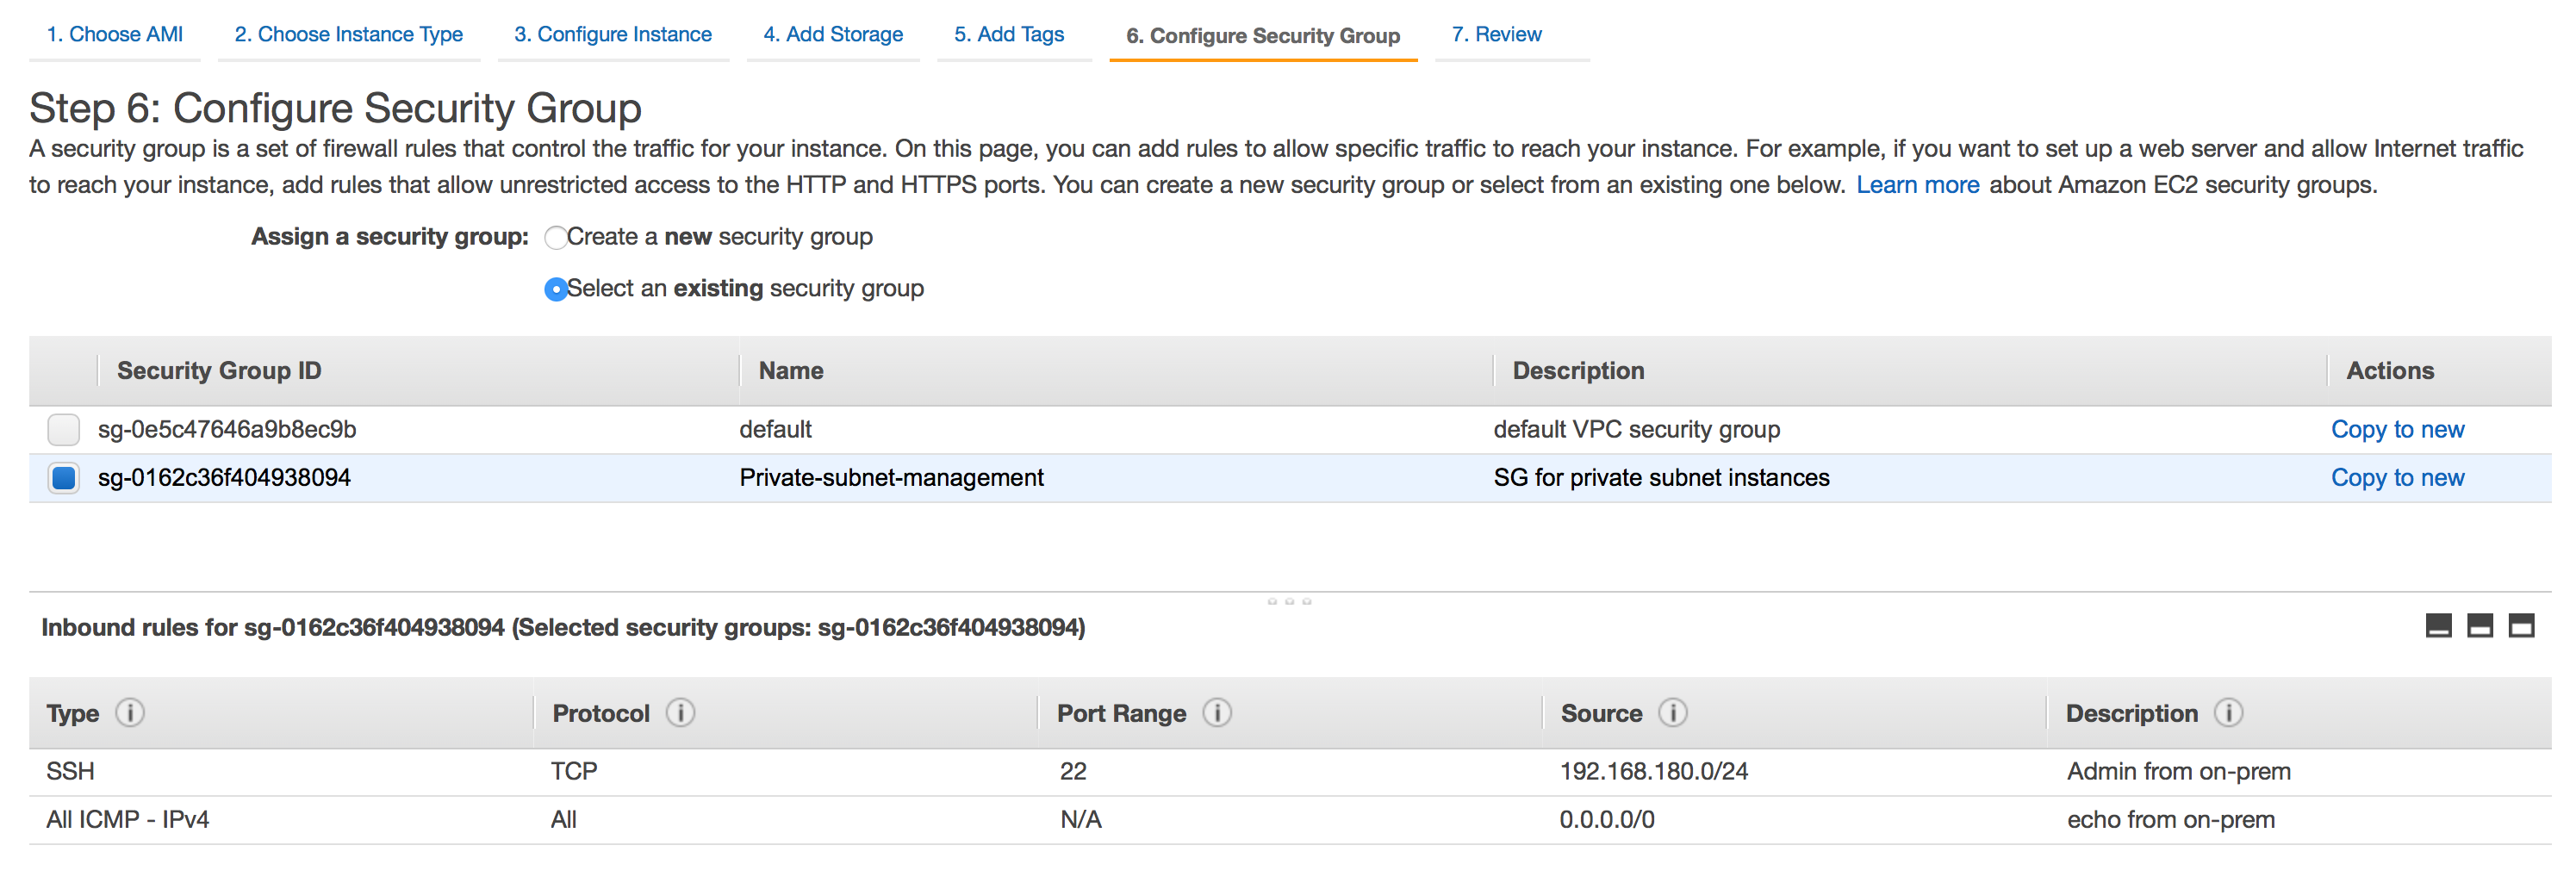 Security Group example for the instance